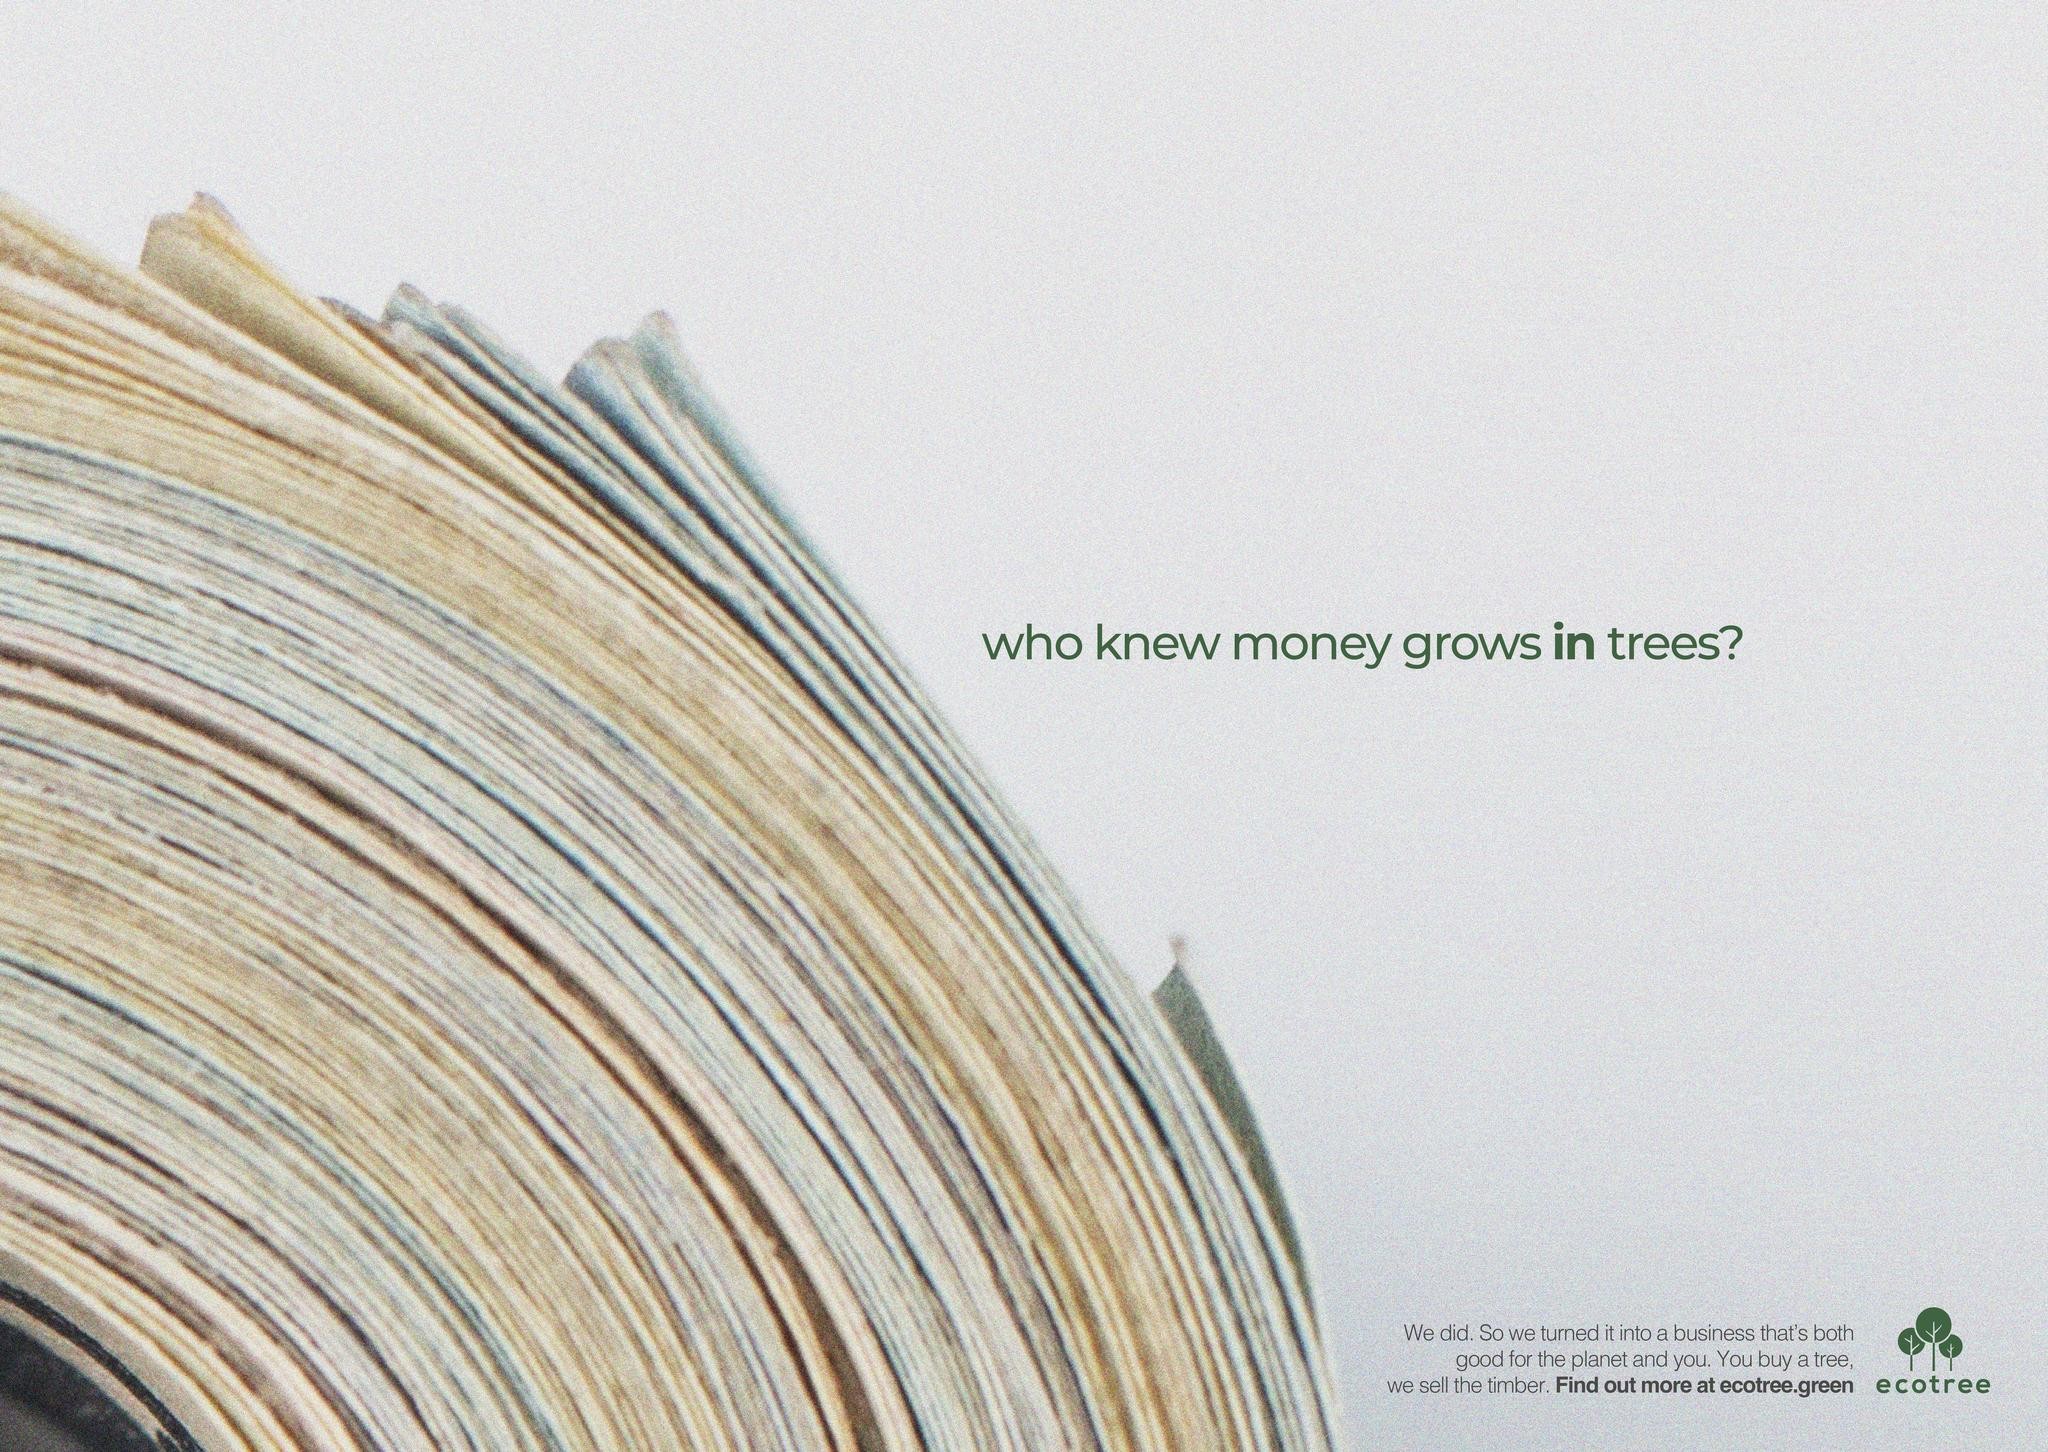 Money grows in trees